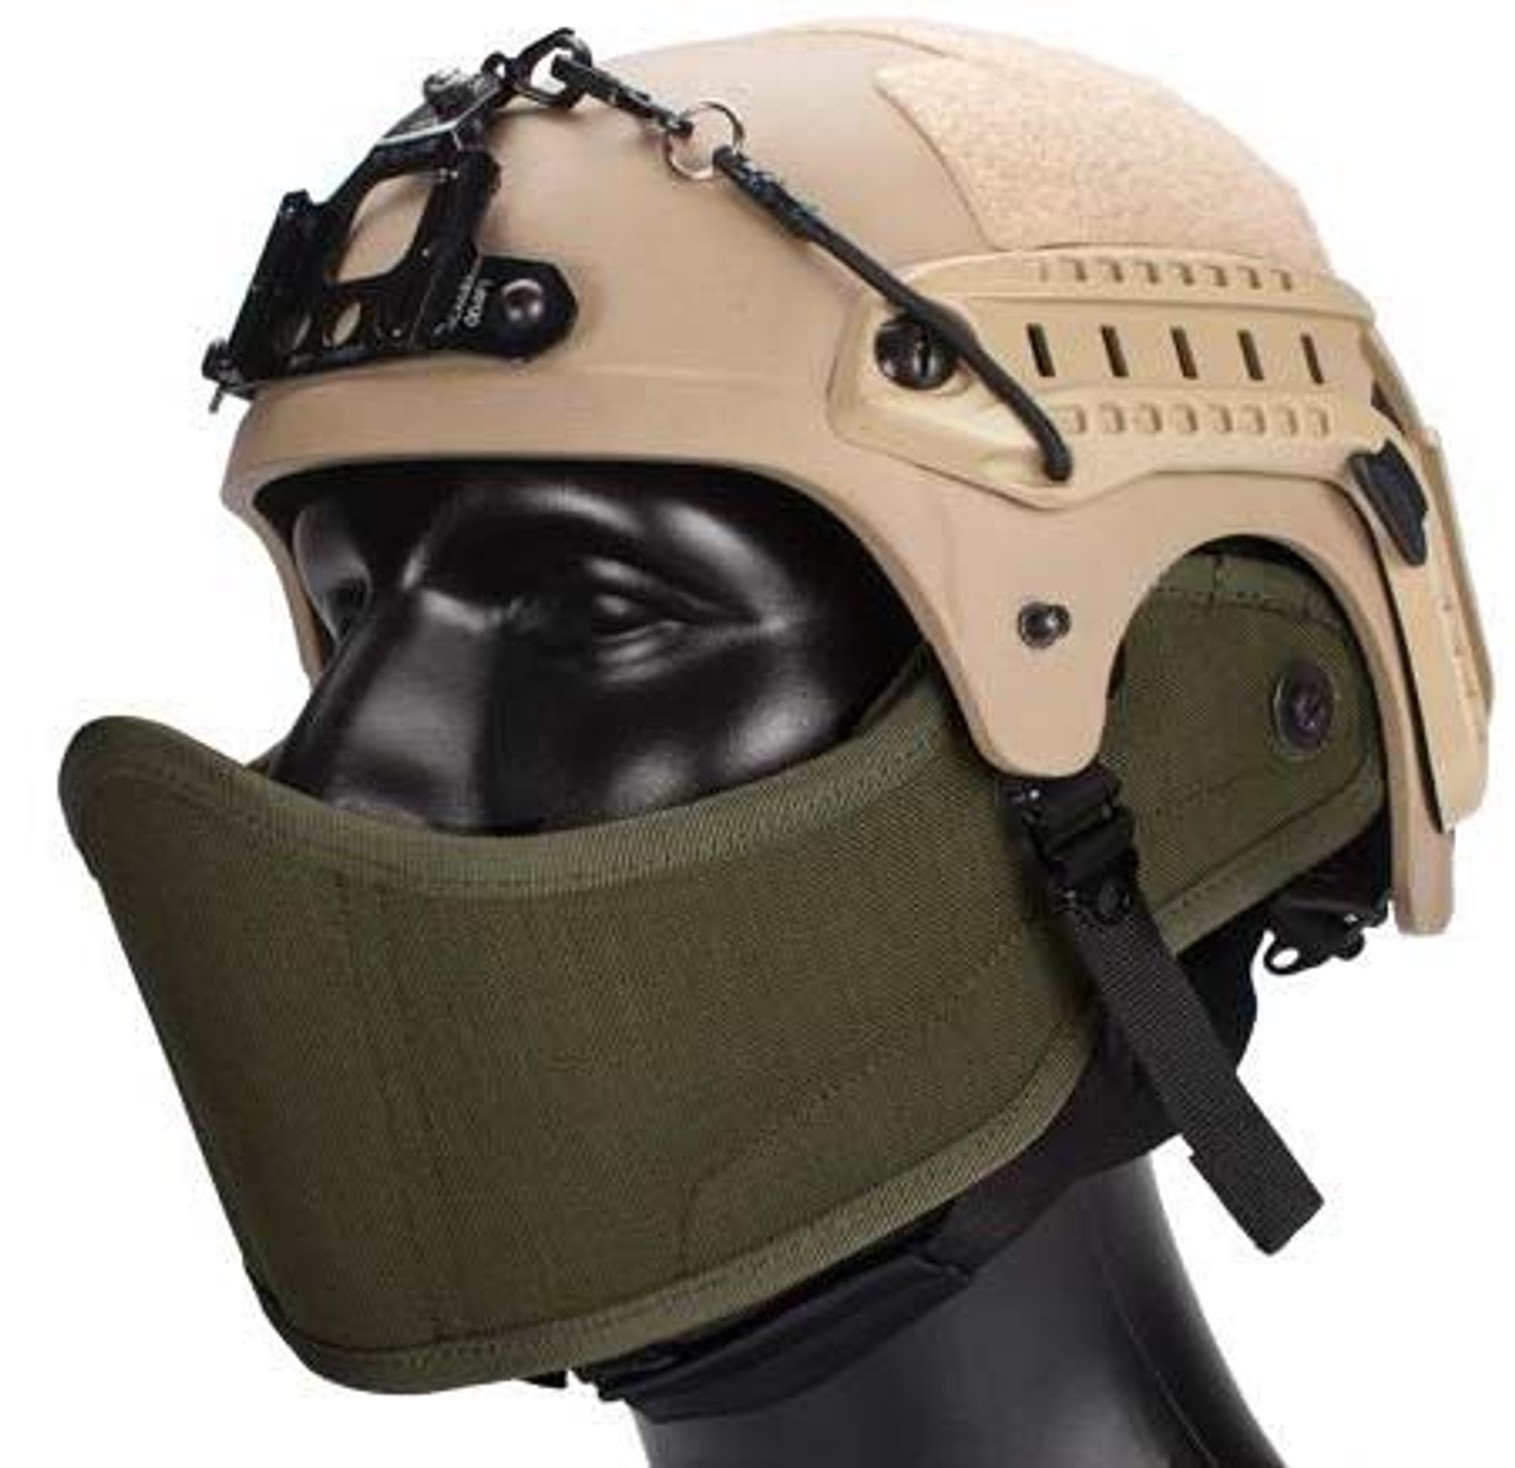 Avengers Helmet Face Armour HAF Mask for Airsoft (Color: Foliage Green)